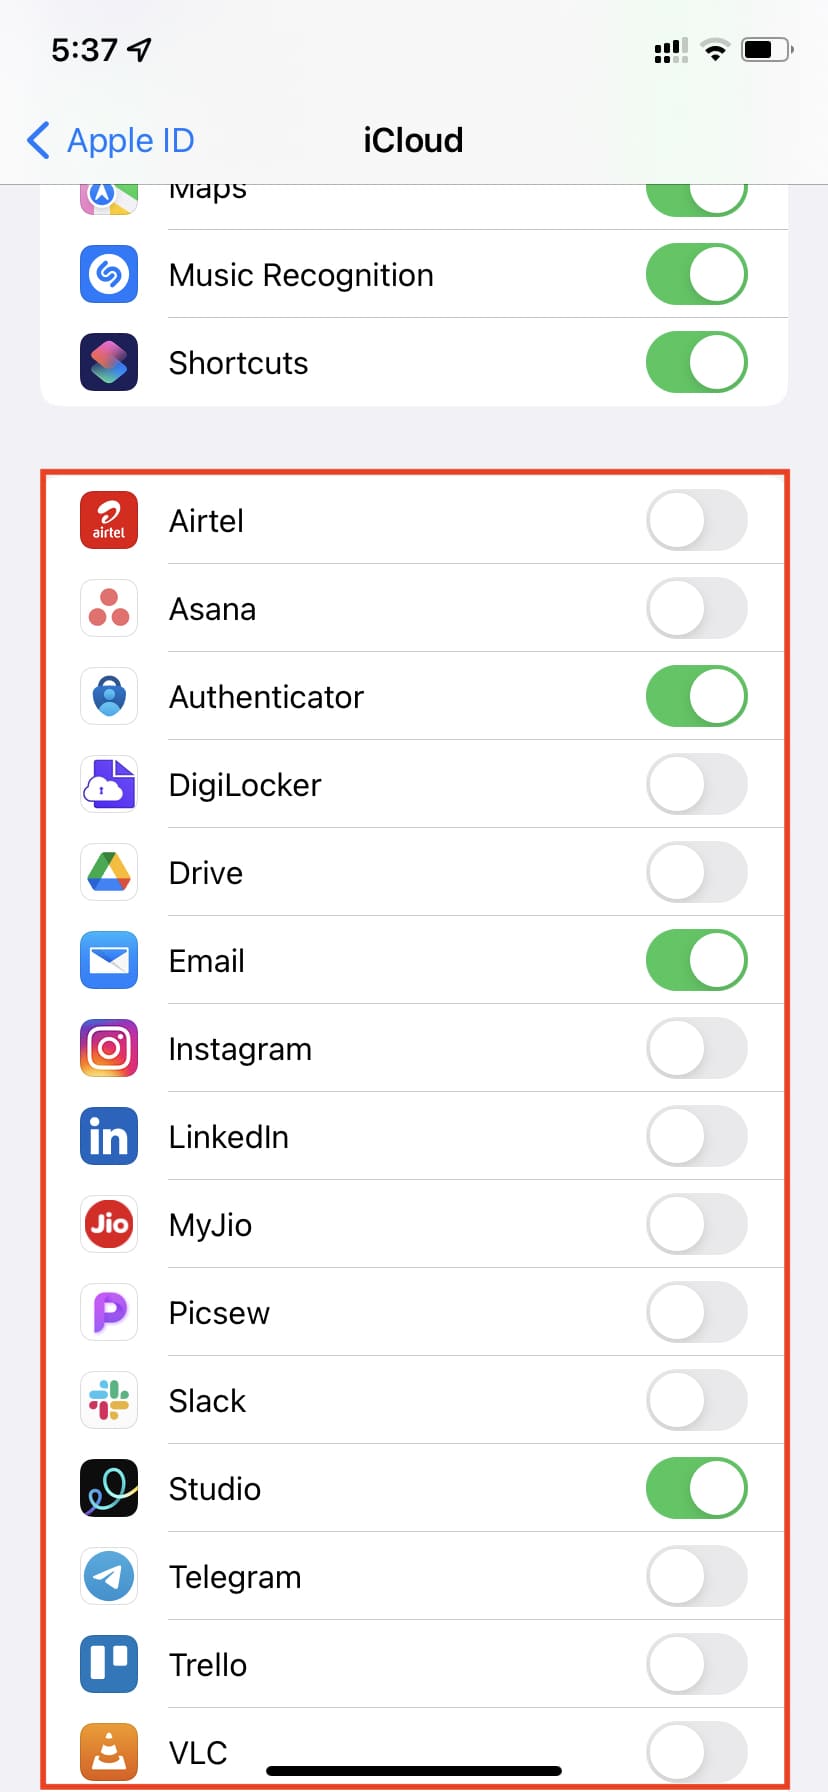 Third-party apps in iCloud